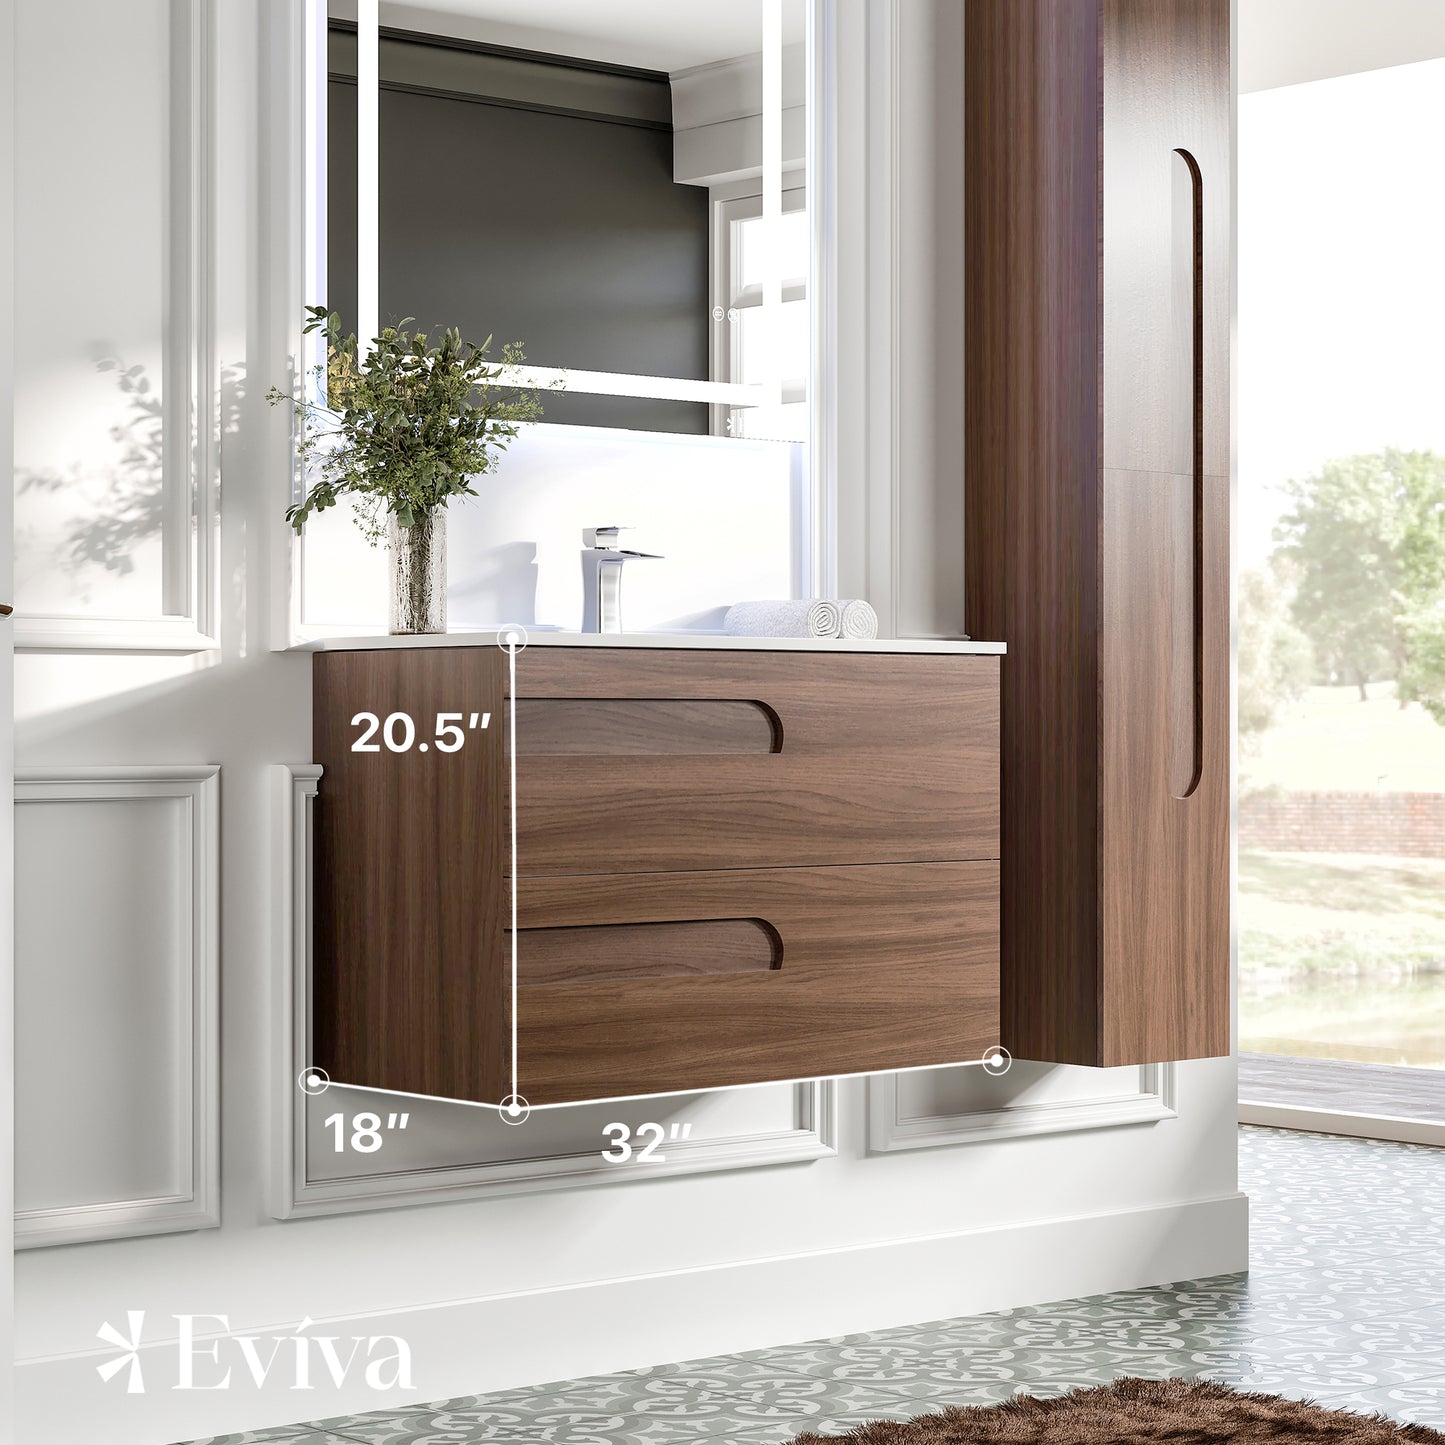 Joy 32"W x 18"D Rosewood Bathroom Vanity with Porcelain Countertop and Integrated Sink